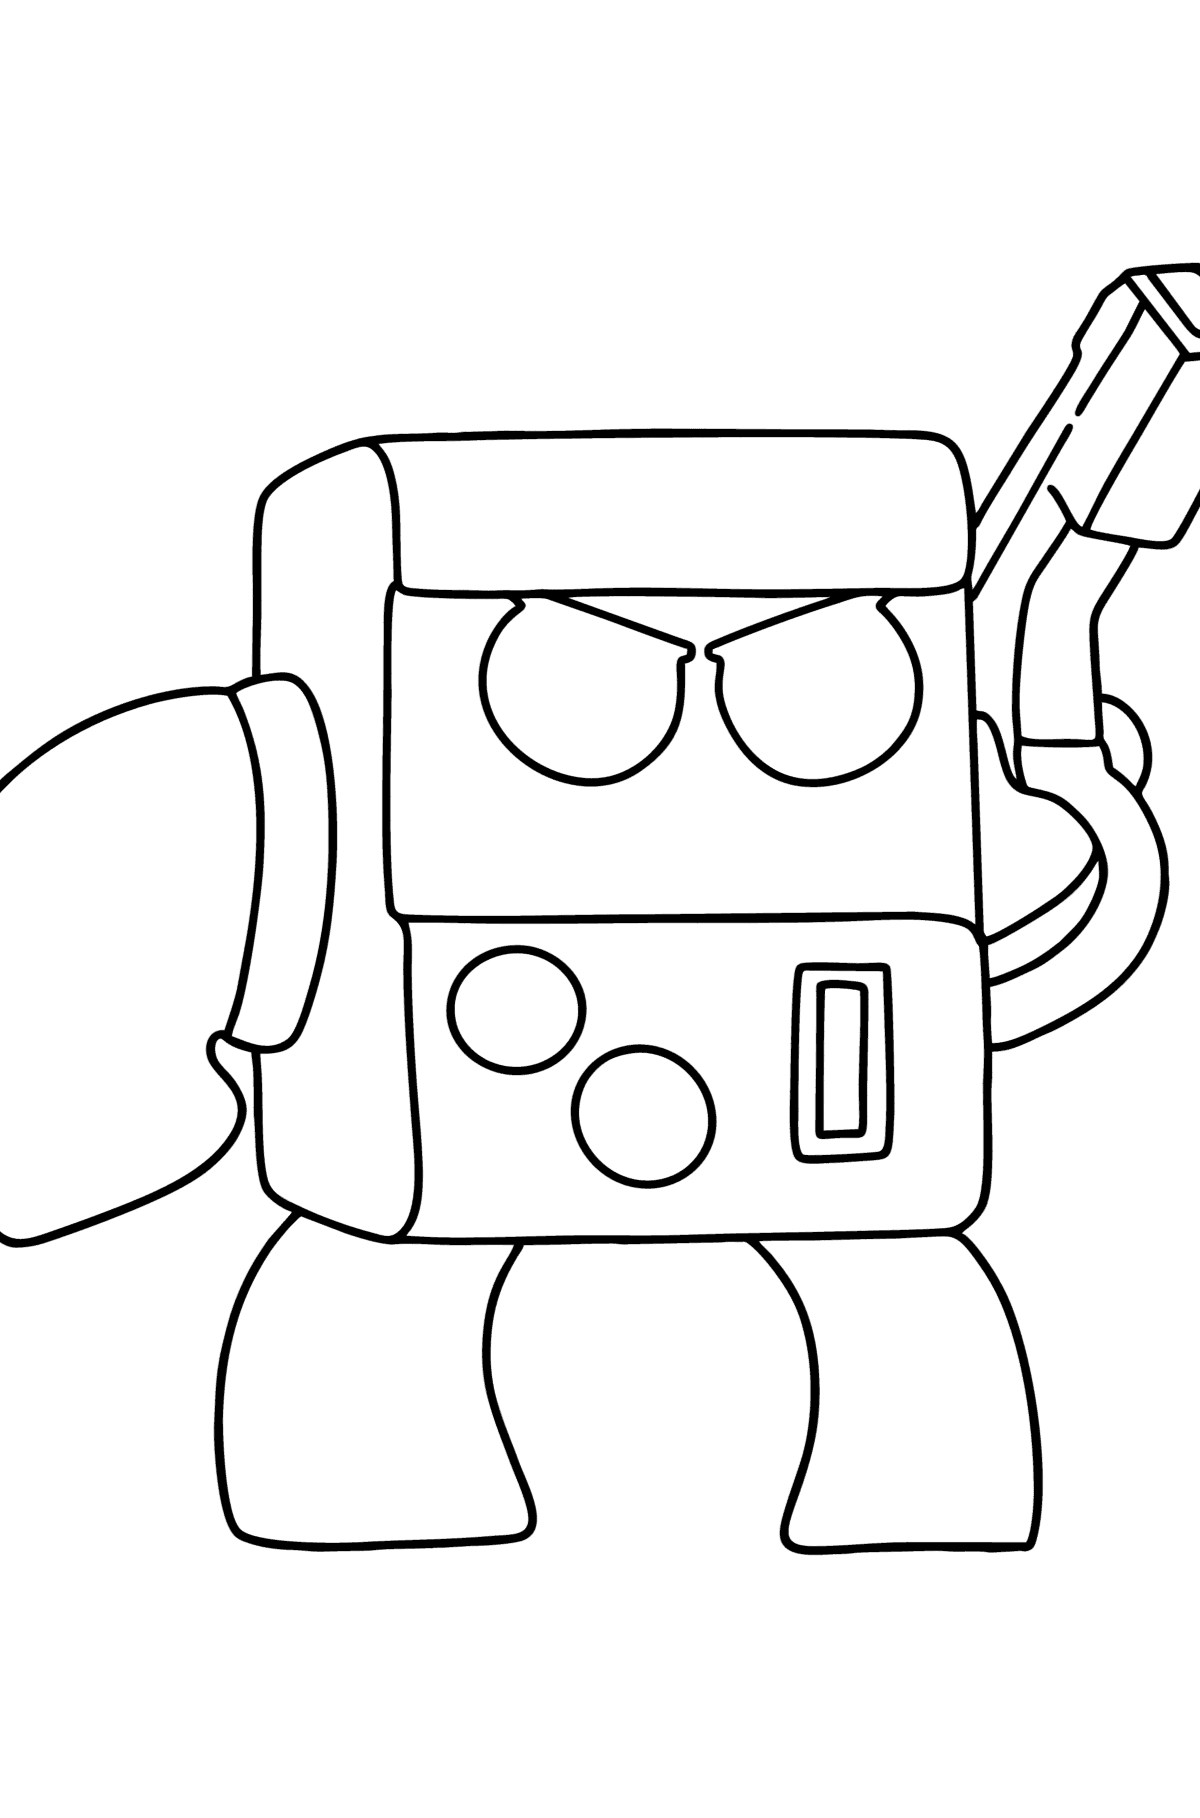 Brawl Stars 8-bit coloring page - Coloring Pages for Kids